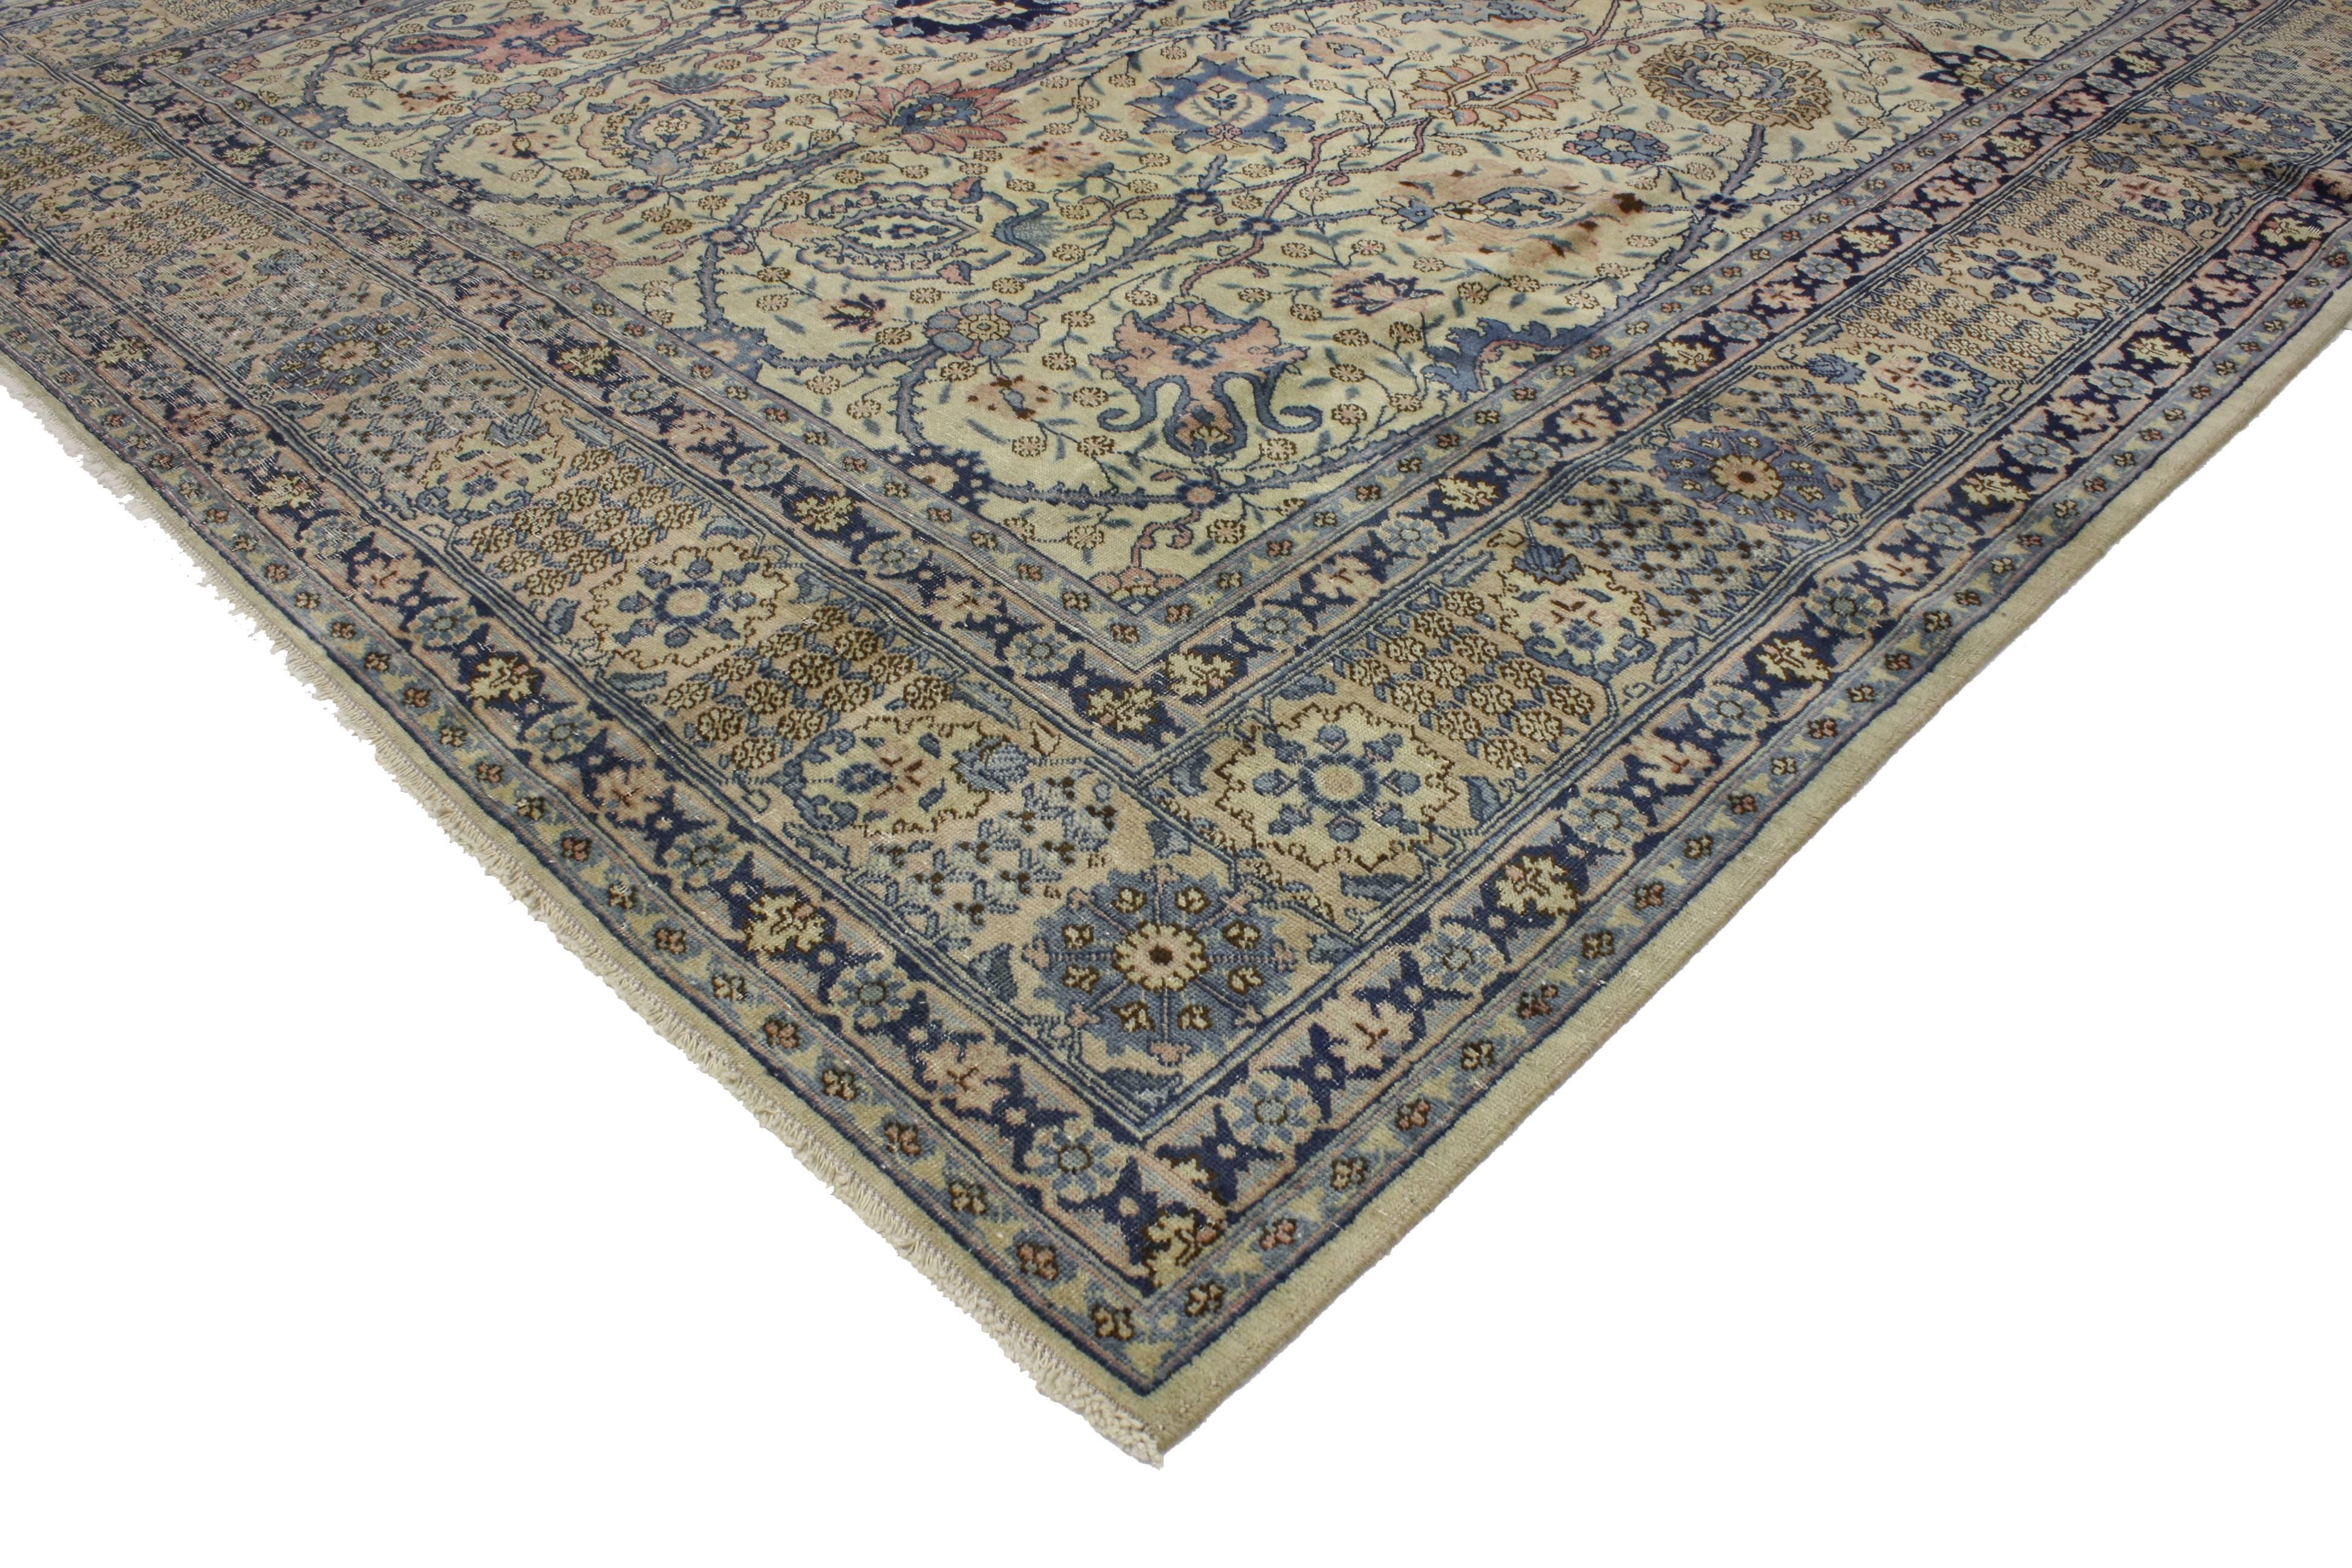 51883 Distressed Antique Persian Tabriz Rug with Georgian Romantic Chippendale Style. This early 20th century distressed antique Persian Tabriz rug with Modern Industrial style features an all-over geometric pattern surrounded by a complementary